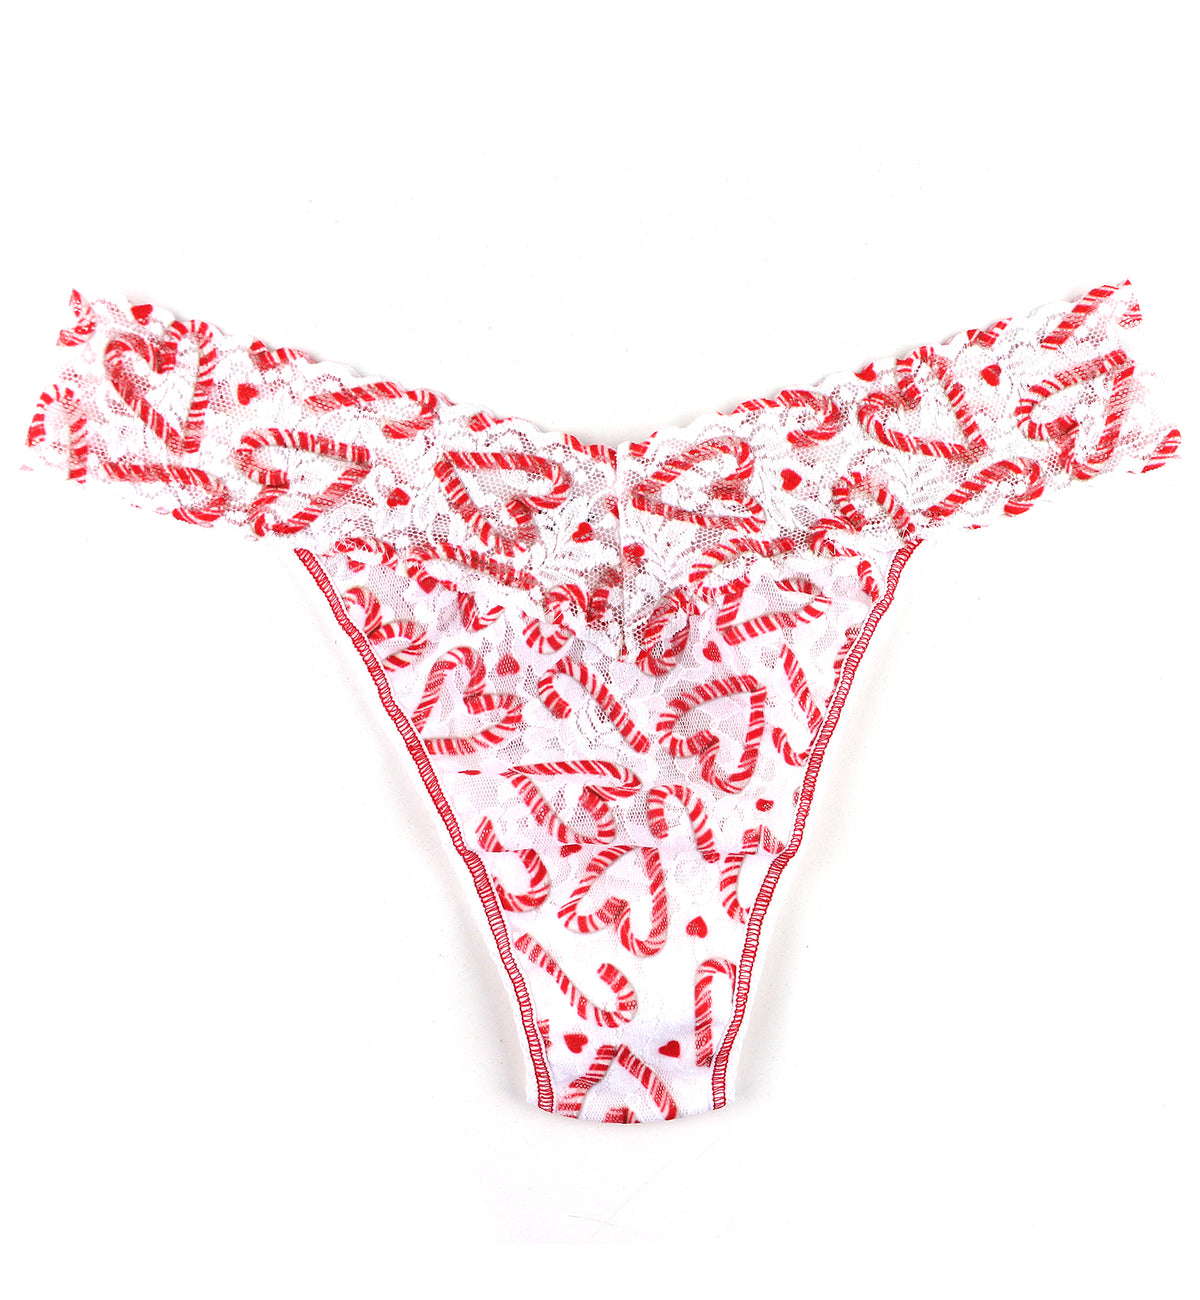 Hanky Panky Signature Lace Printed Original Rise Thong (PR4811P),Candy Cane - Candy Cane,One Size